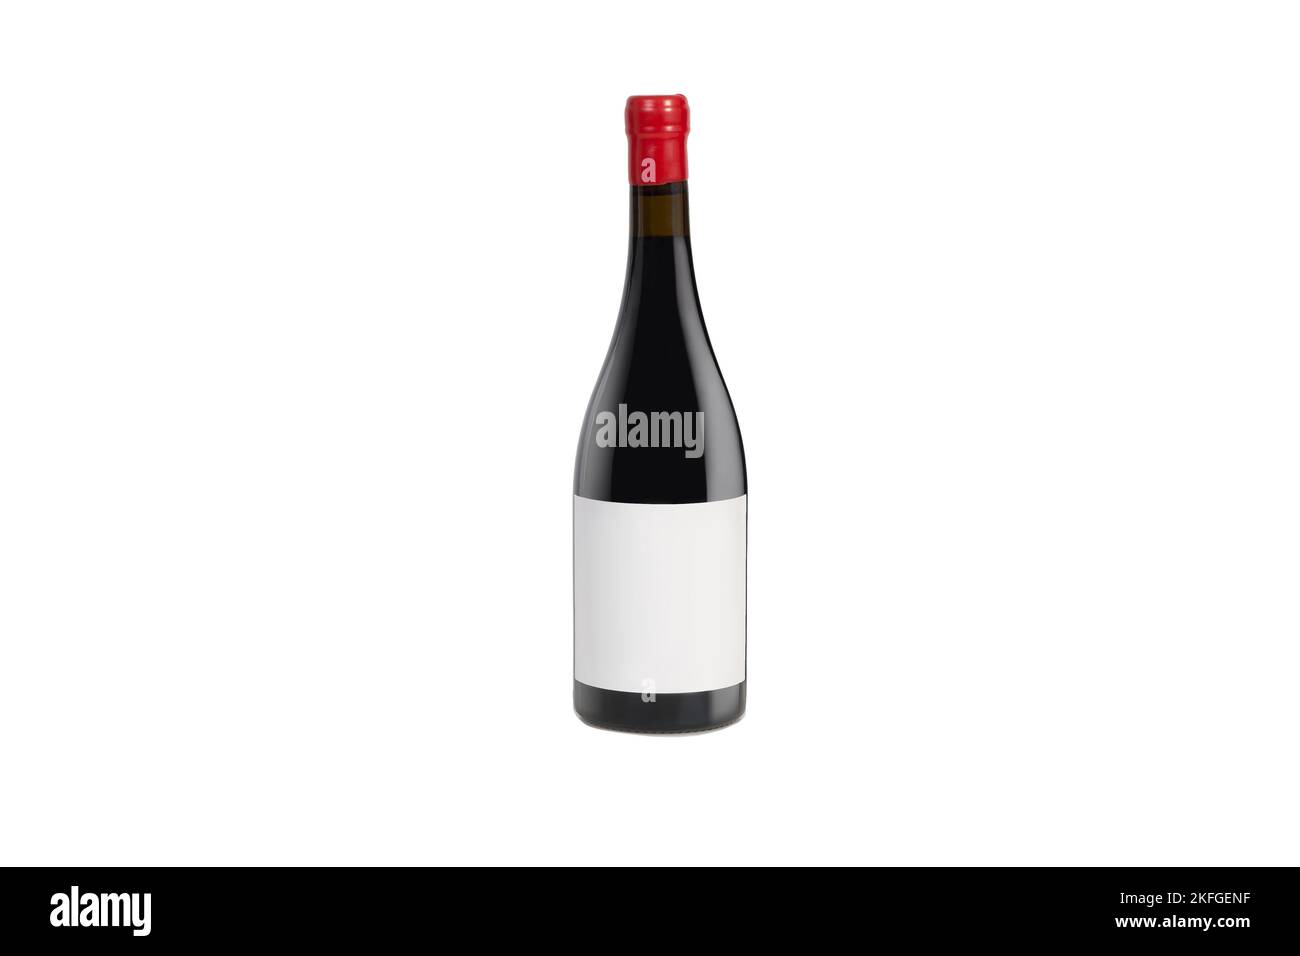 Isolated bottle of wine or champagne with blank label and red stopper. Stock Photo